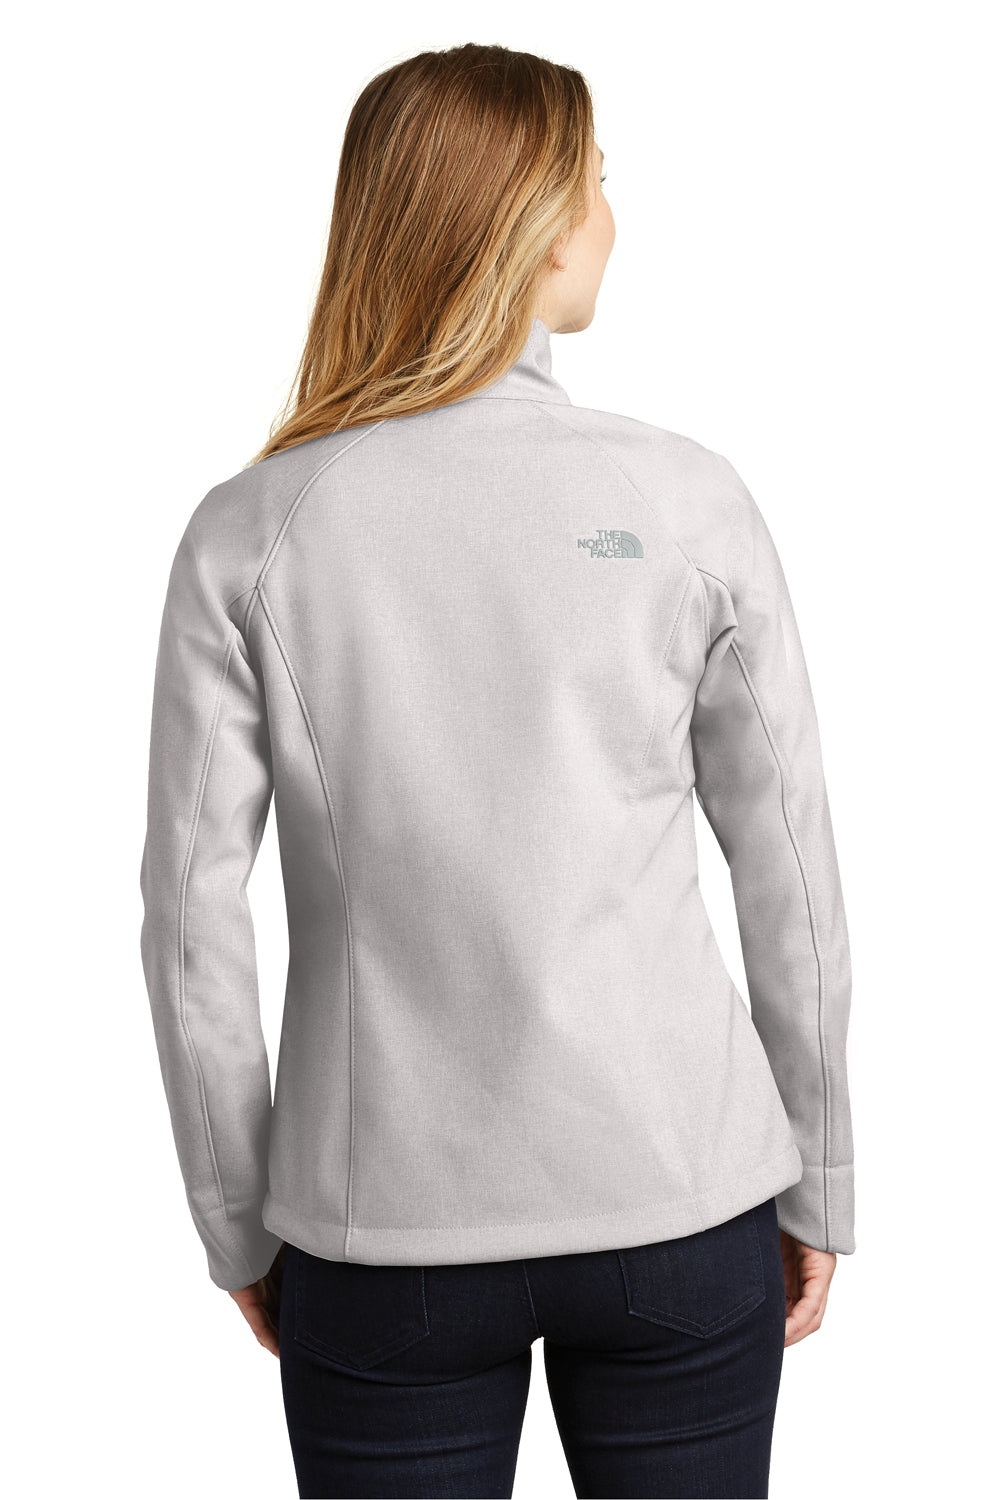 The North Face NF0A3LGU Womens Apex Barrier Wind & Resistant Full Zip Jacket Heather Light Grey Back